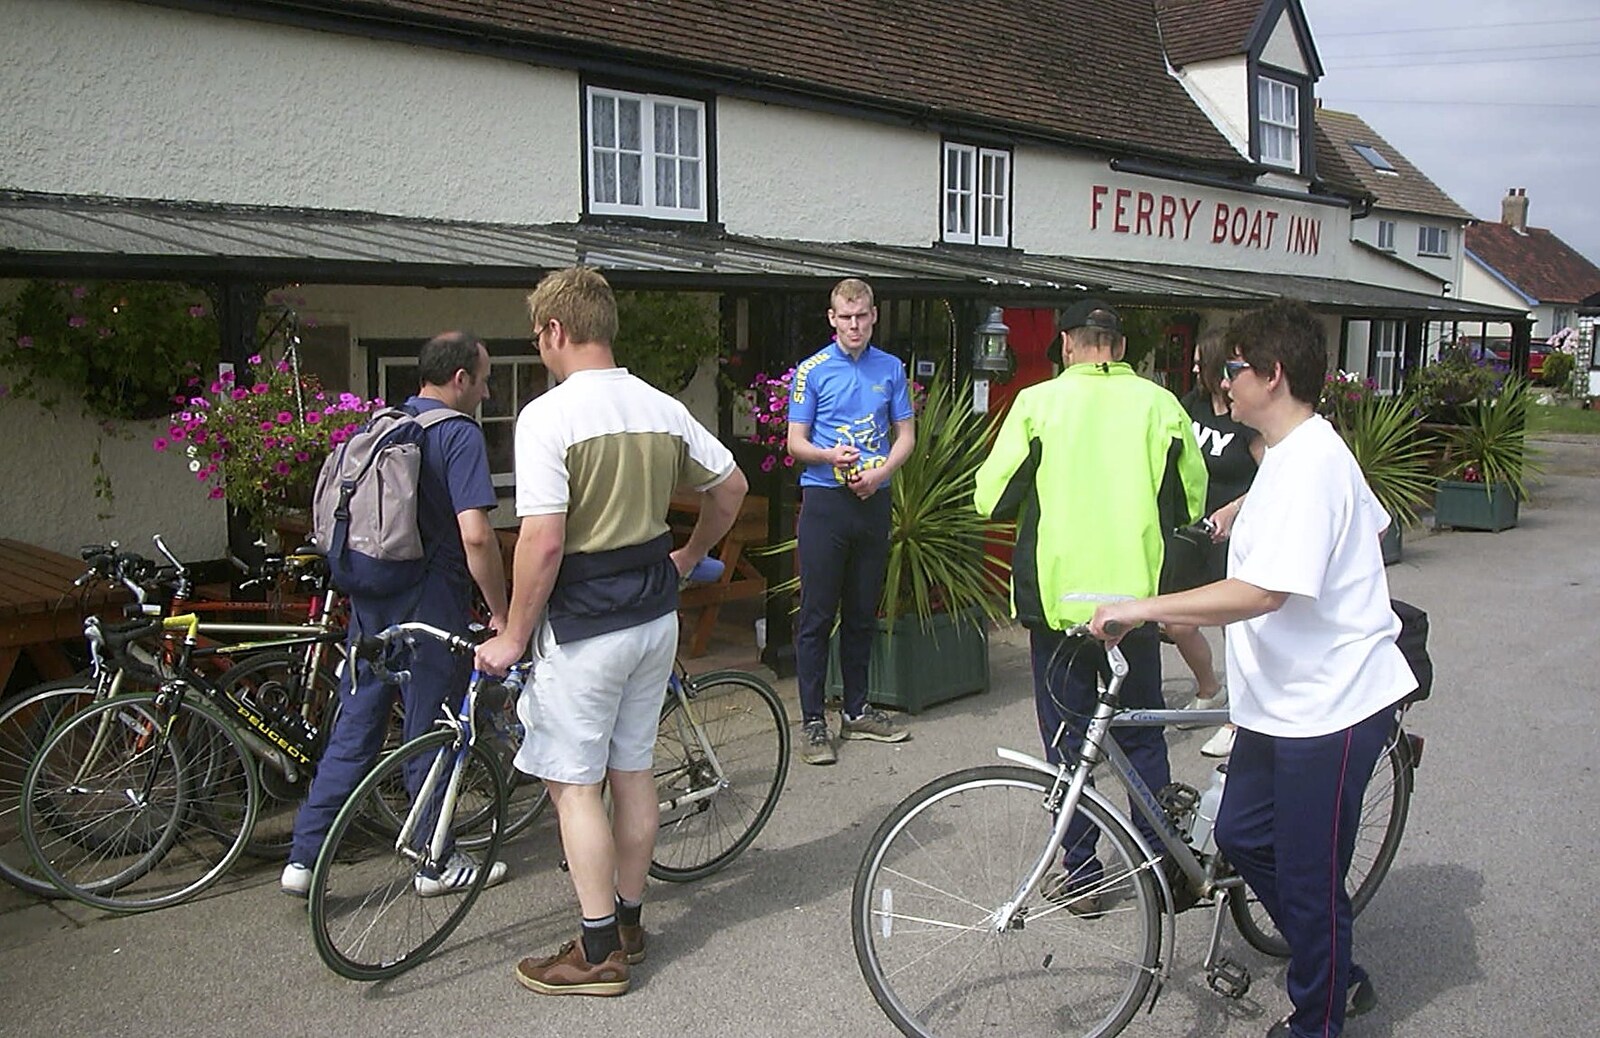 A BSCC Splinter Group Camping Trip, Shottisham, Suffolk - 13th August 2004: Milling around outside the Ferry Boat Inn